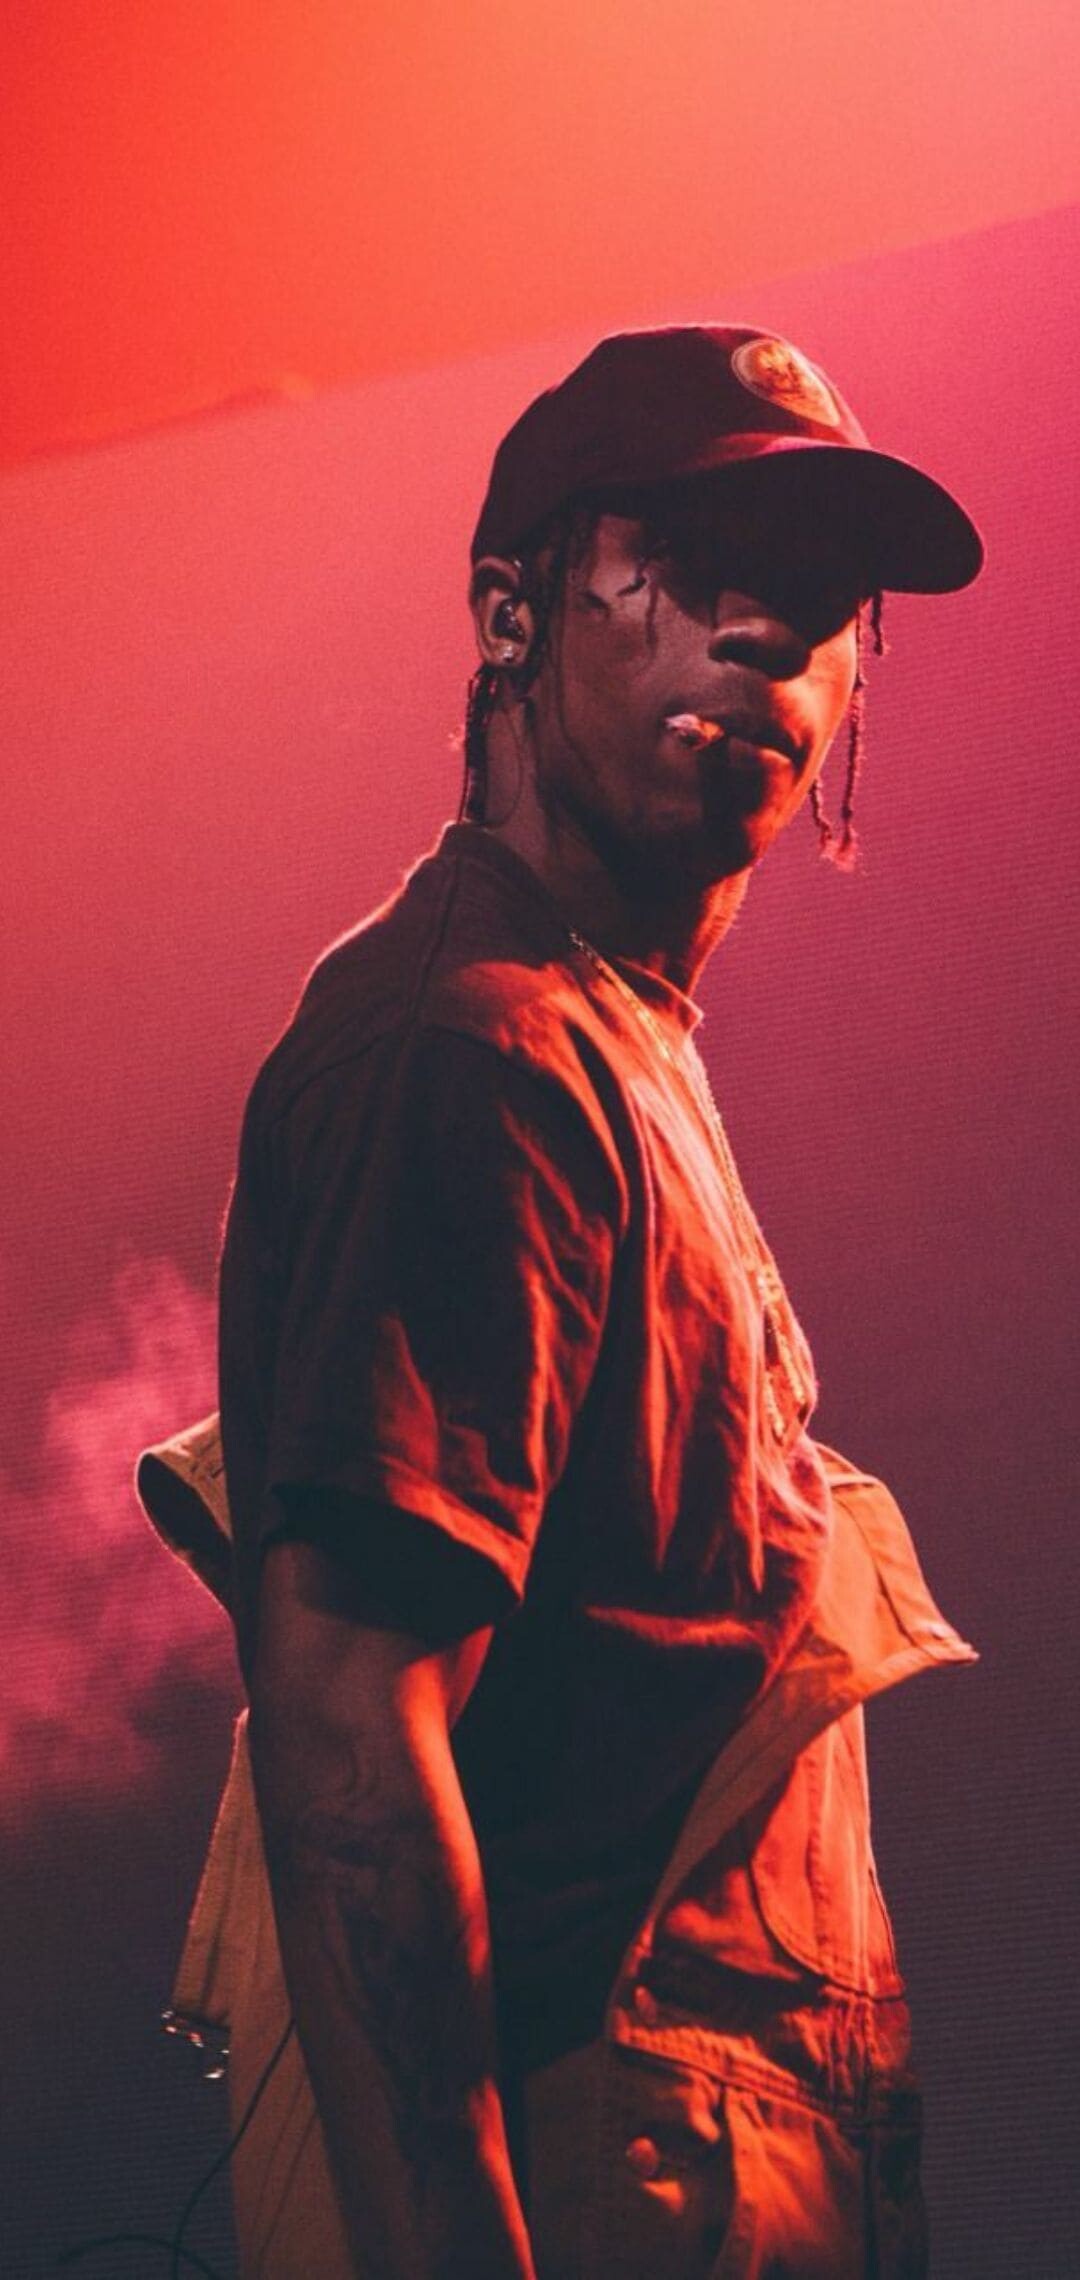 Travis Scott: American singer, Popular for his mixtapes and association with Kanye West's GOOD Music label. 1080x2280 HD Background.